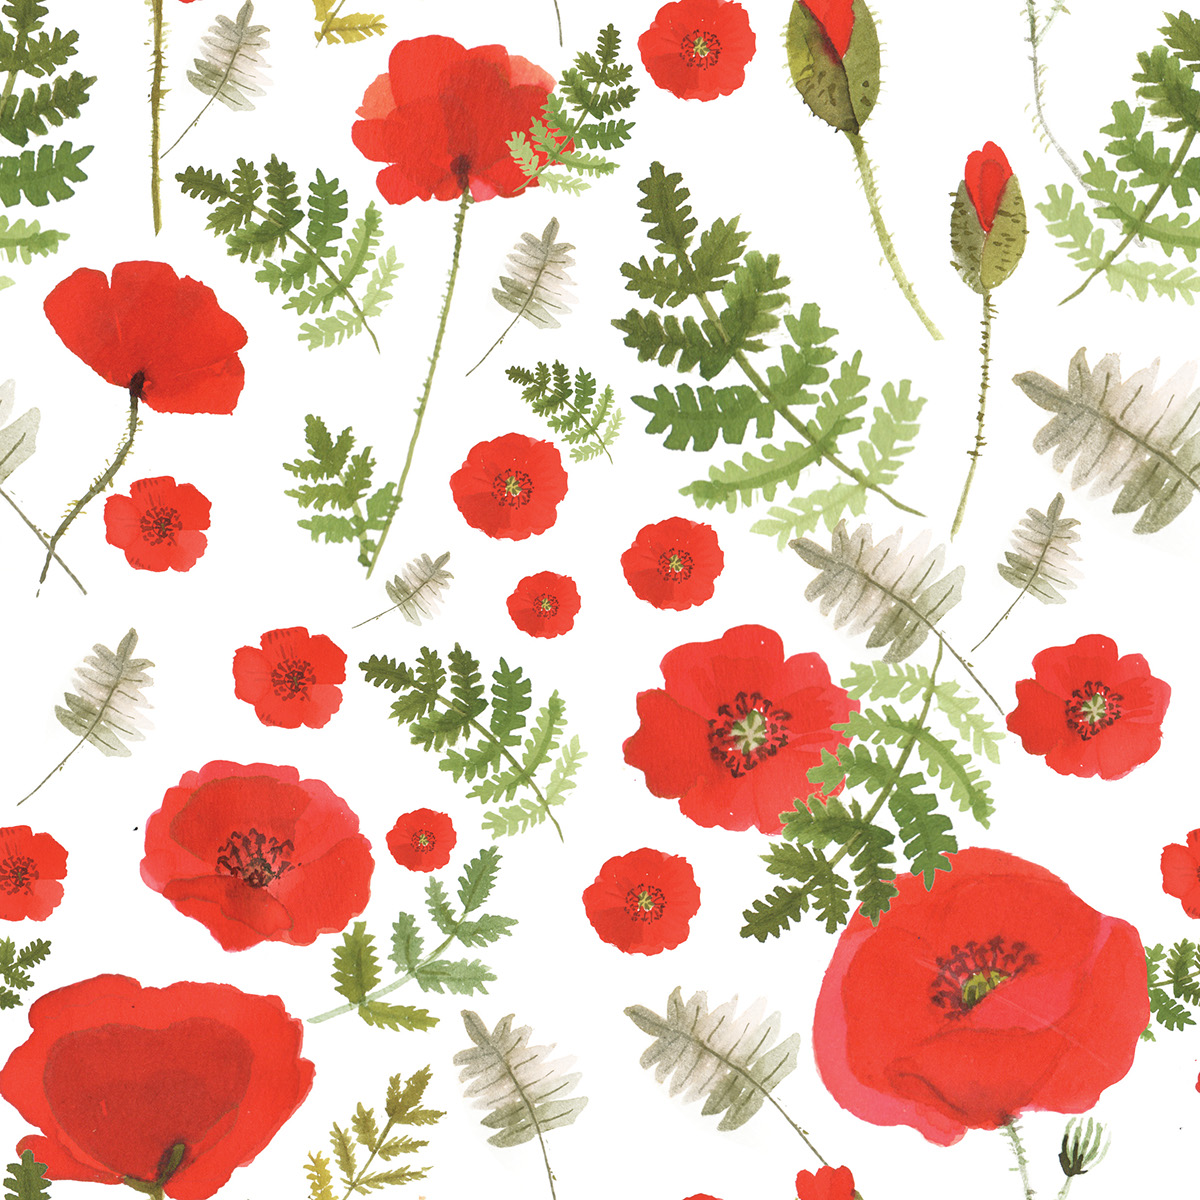 poppy poppies Flowers red textile pattern Interior design armchair room sheets bed field